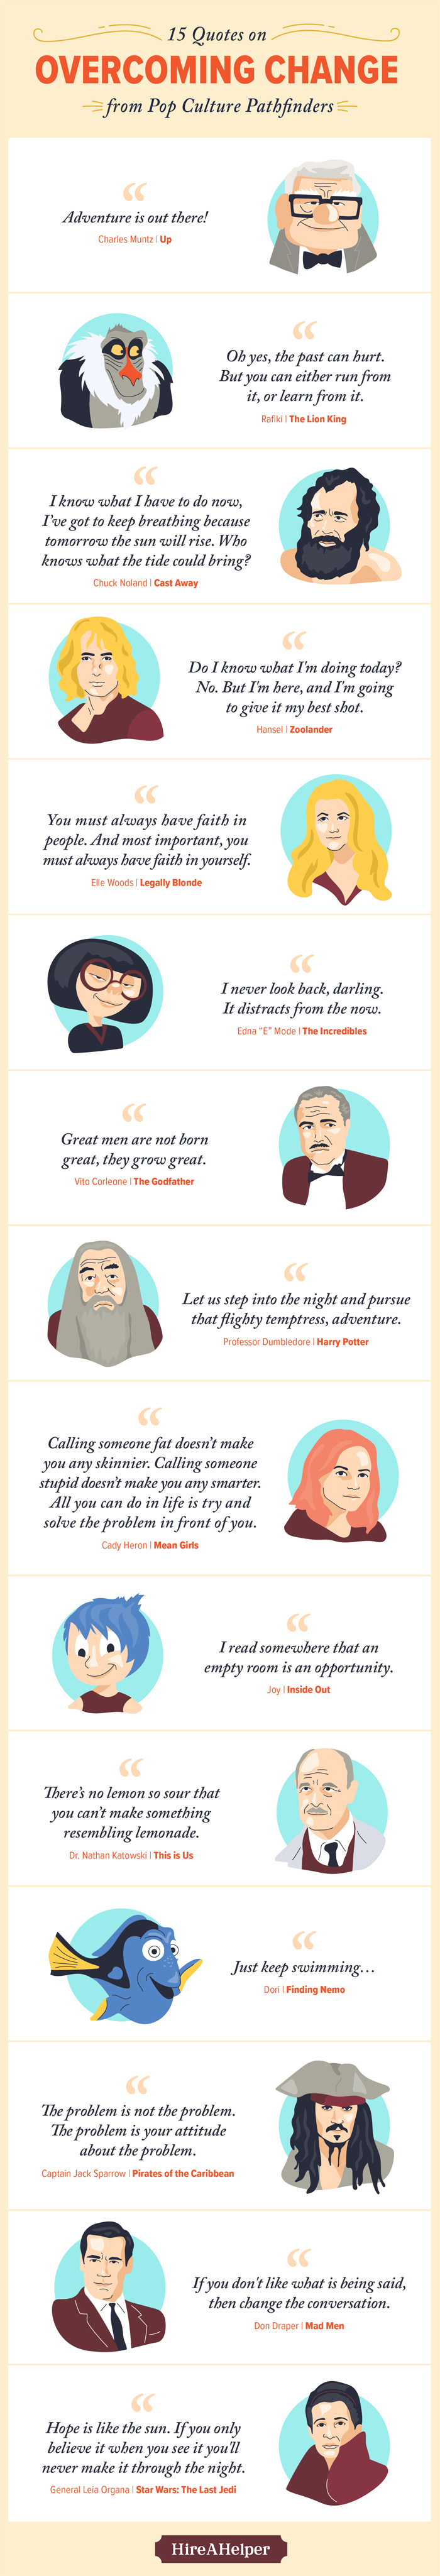 15 Quotes From Pop Culture on a Fresh Start